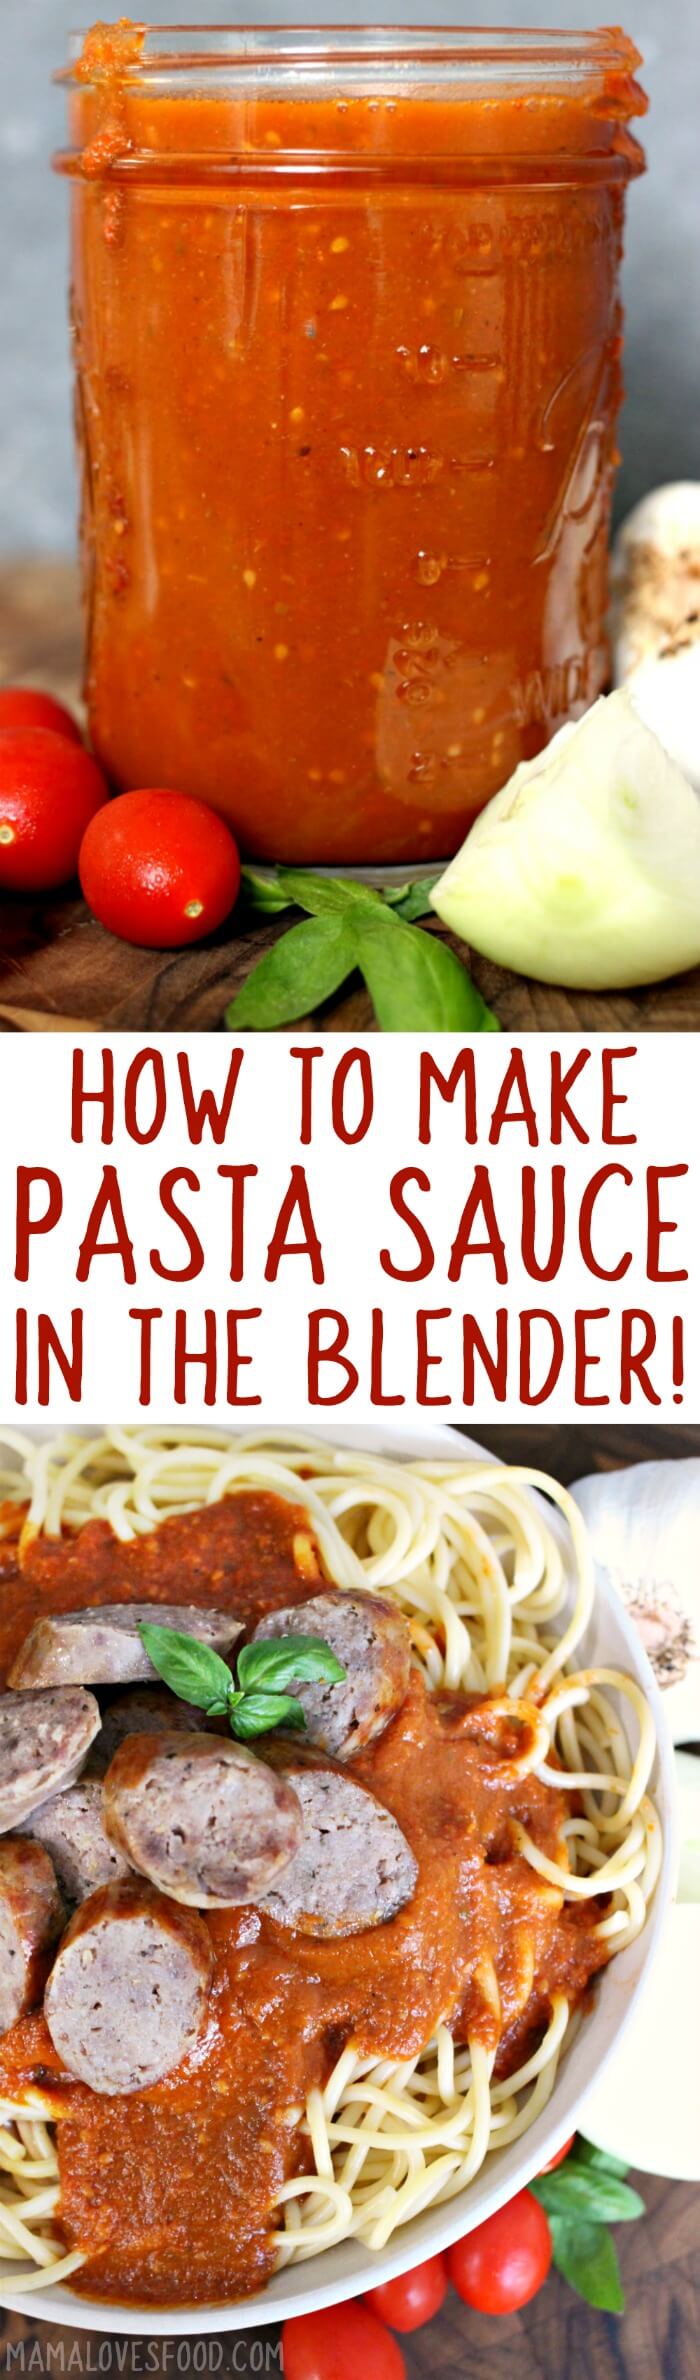 HOW TO MAKE PASTA SAUCE IN THE BLENDER